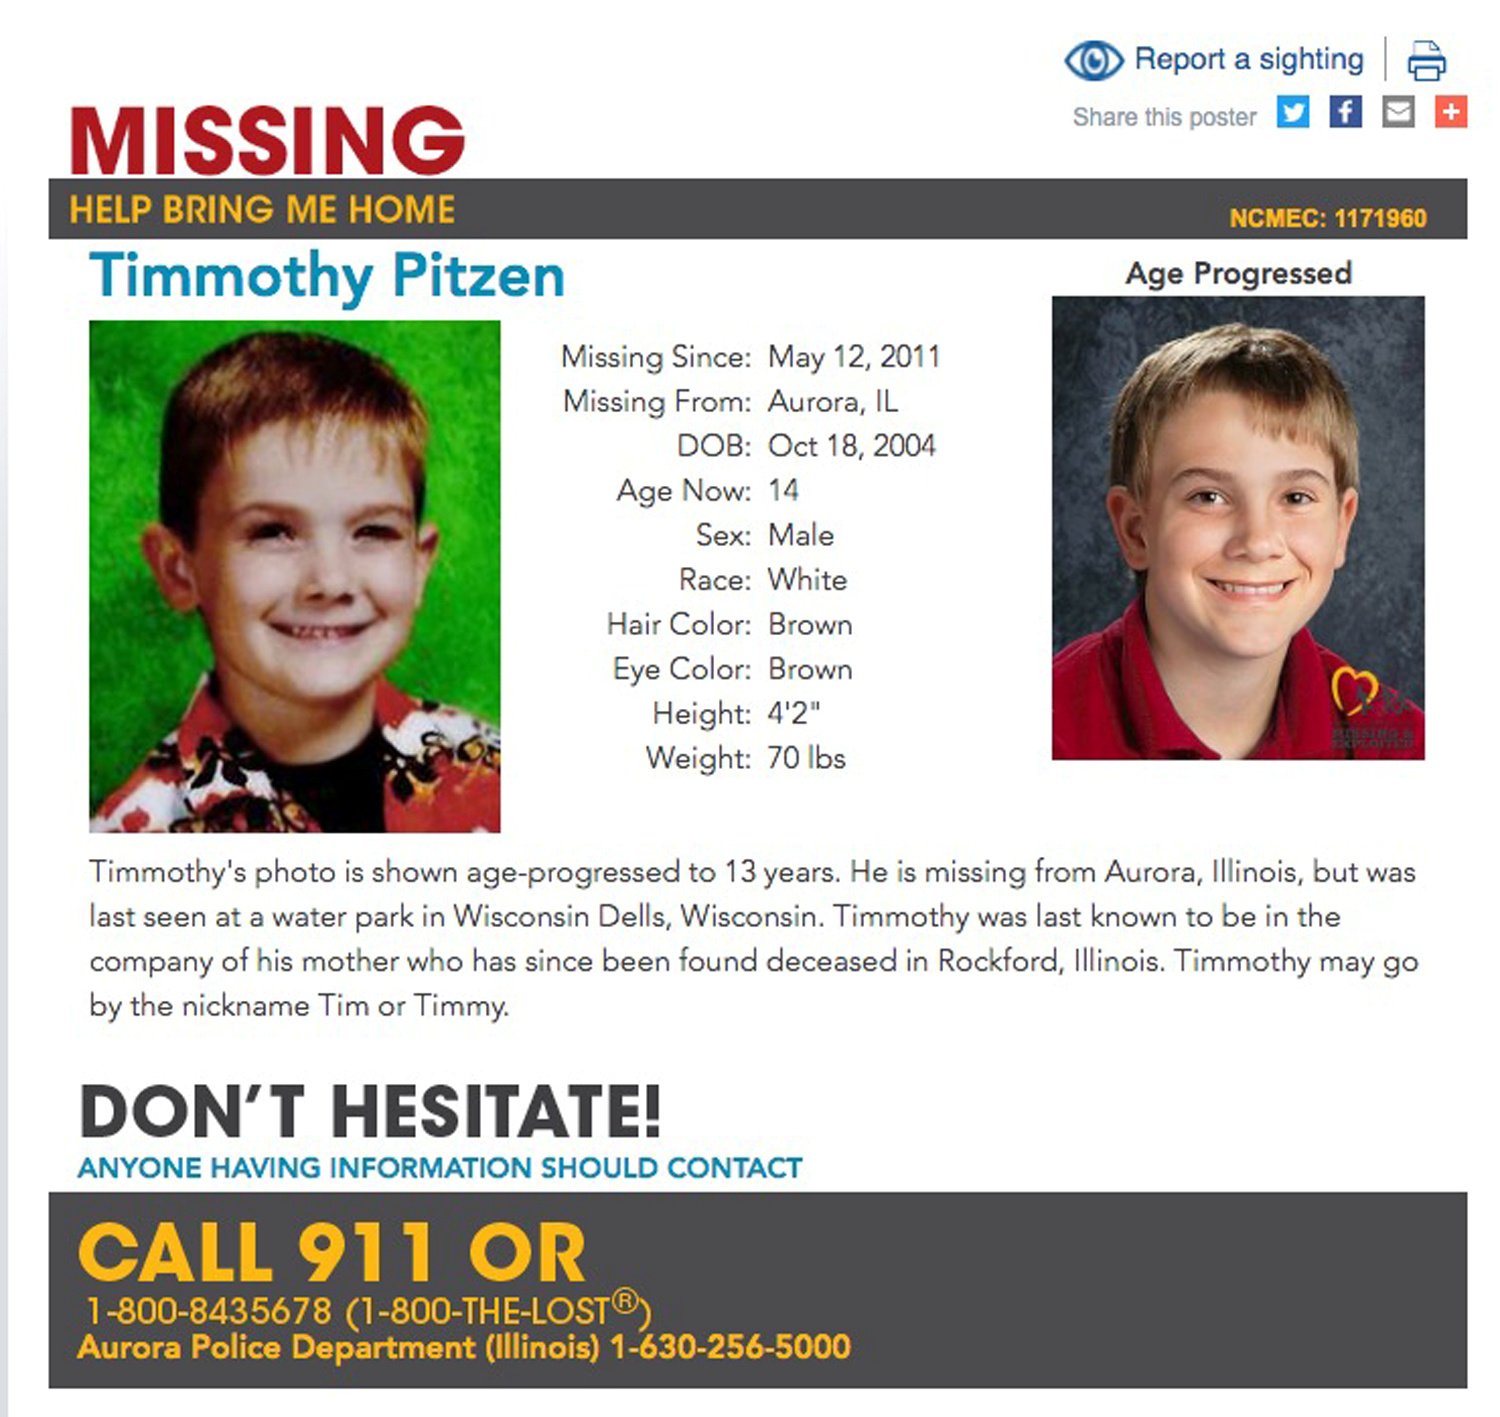 Timmothy Pitzen, missing since May 12, 2011, is shown in both an undated photo and a rendition of what he may look like at age 13 on a poster obtained by Reuters April 4, 2019. National Center for Missing & Exploited Children/Handout via REUTERS